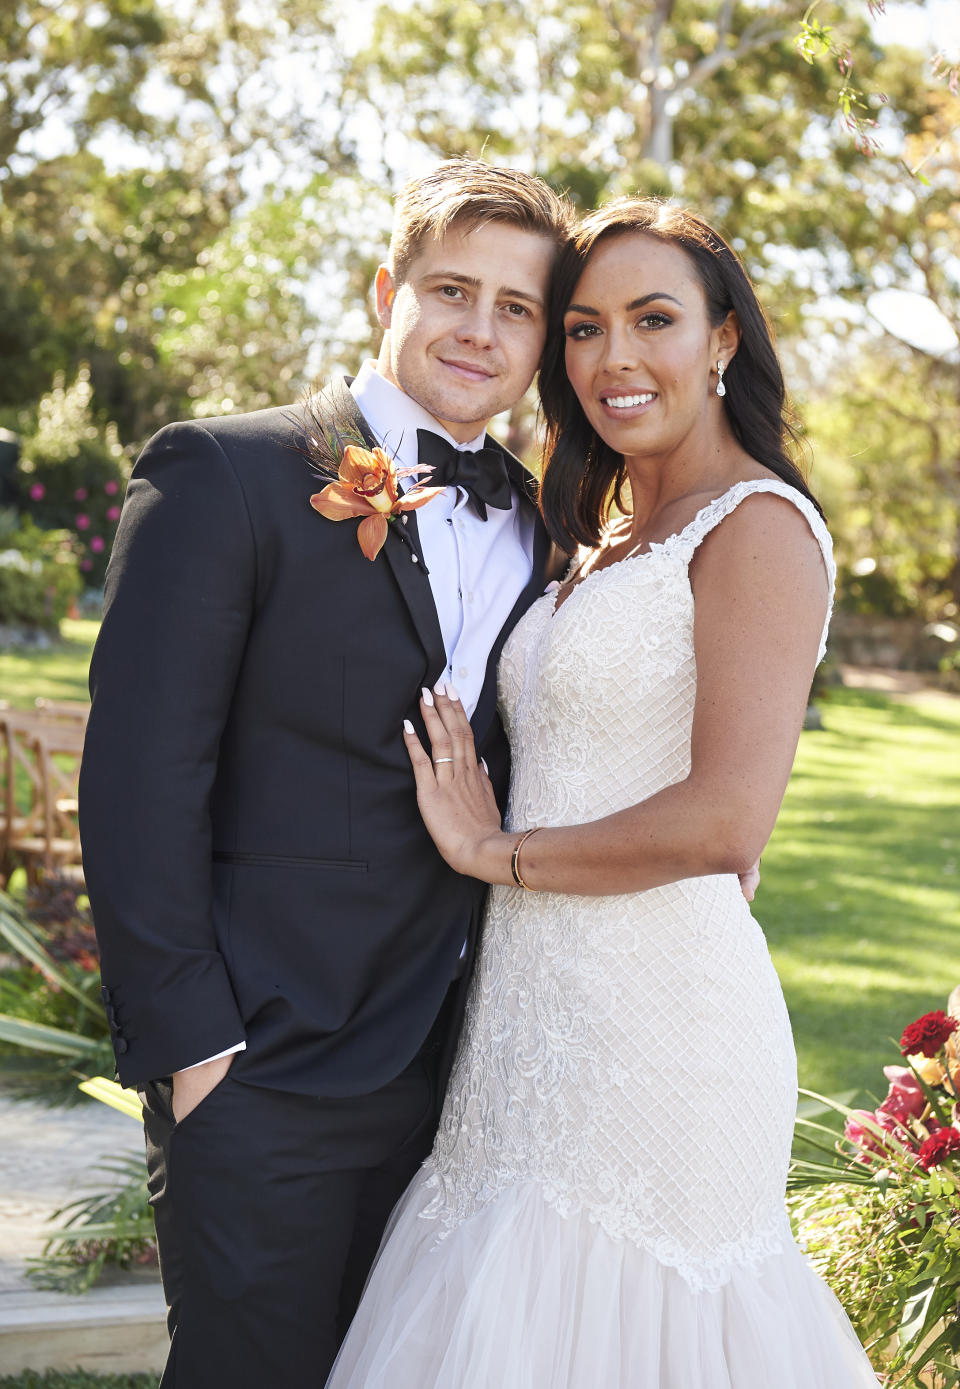 Married At First Sight bride and groom Natasha Spencer and Mikey Pembroke on their wedding day